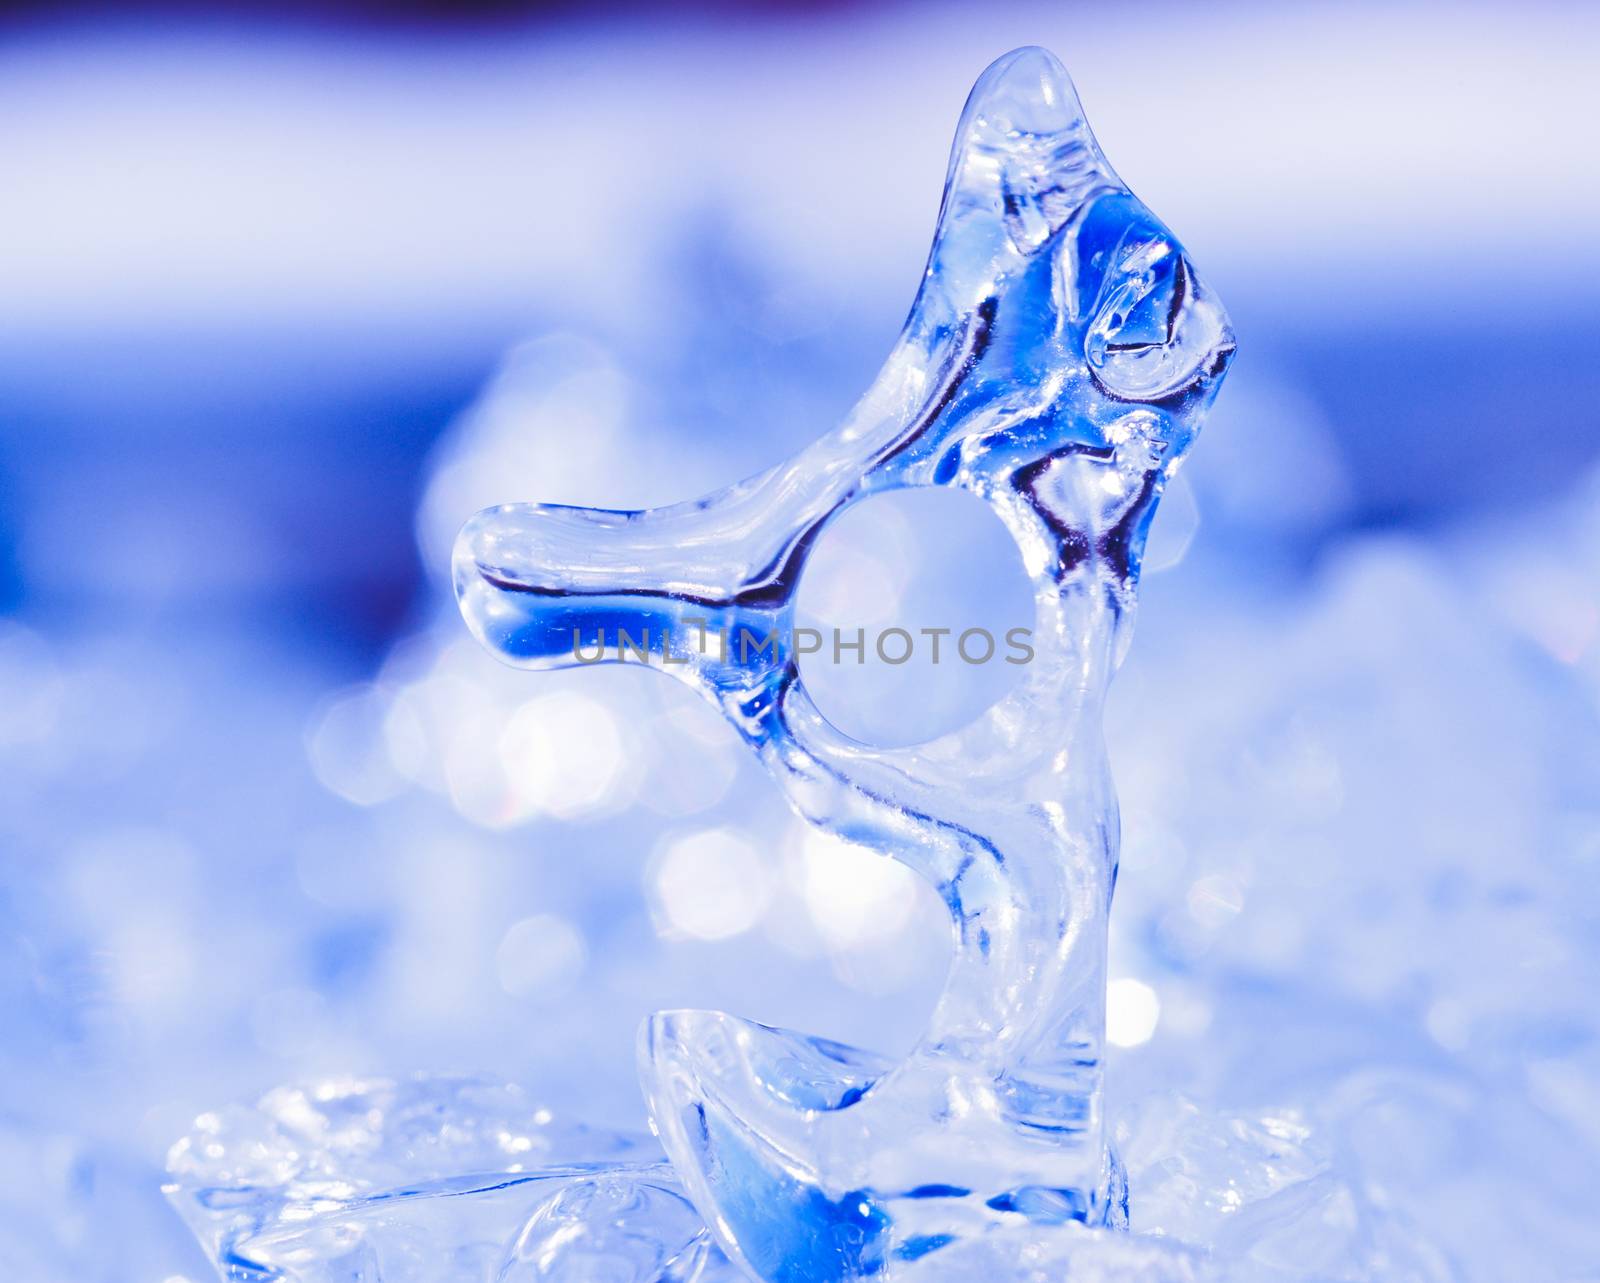 Frozen natural ice sculpture nature abstract art by PiLens